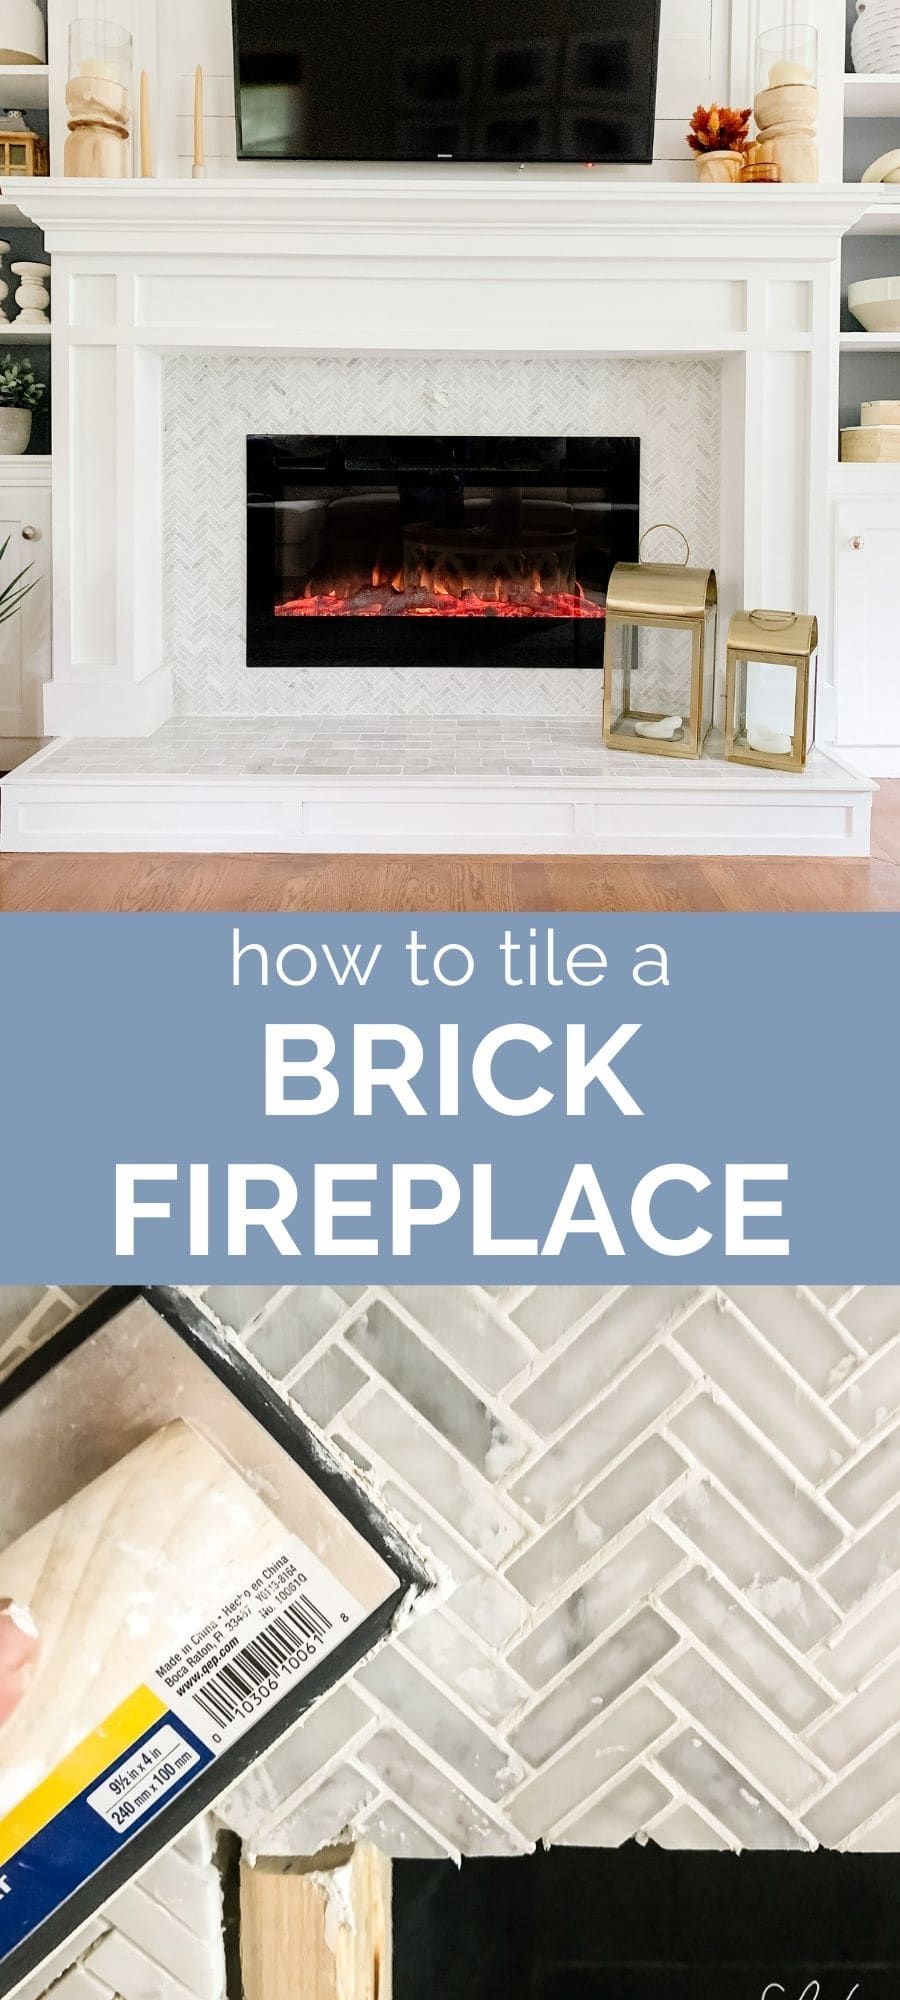 How To Tile A Brick Fireplace Jenna, How To Replace Tile Around Fireplace